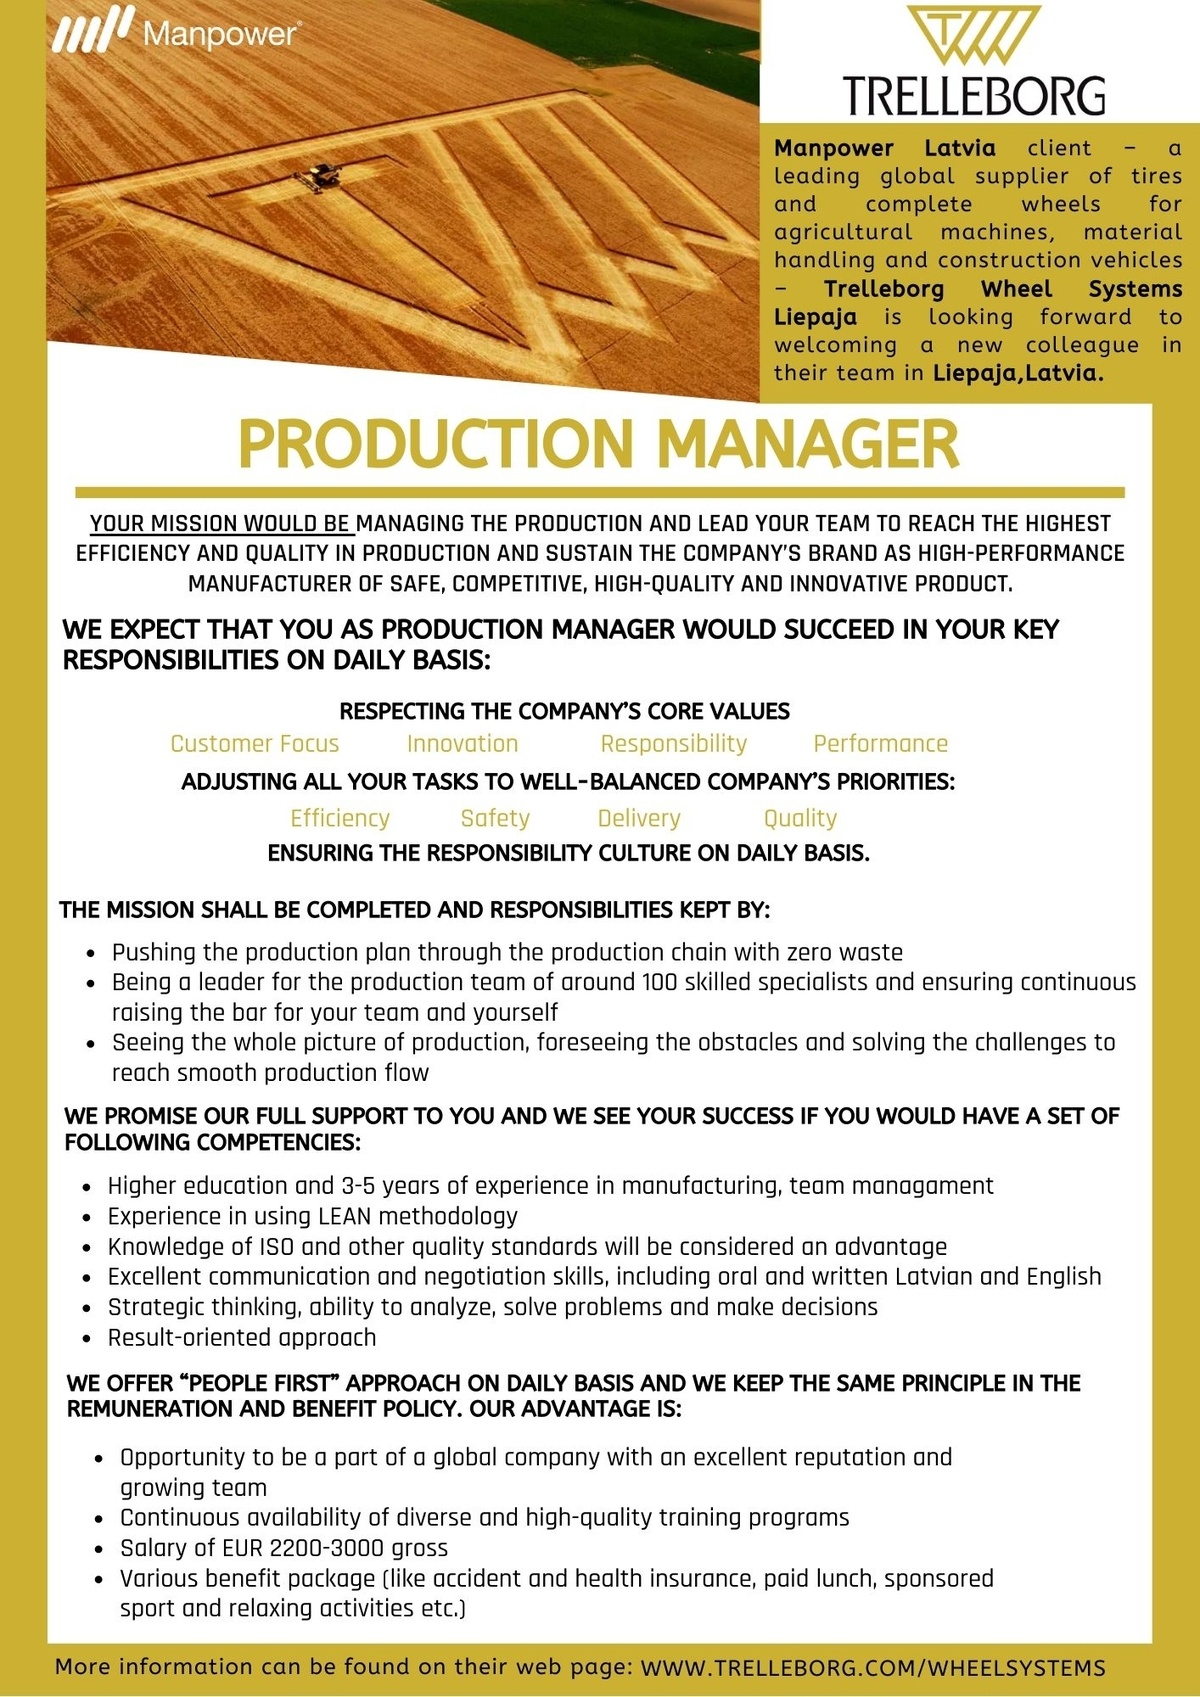 MANPOWER Production Manager